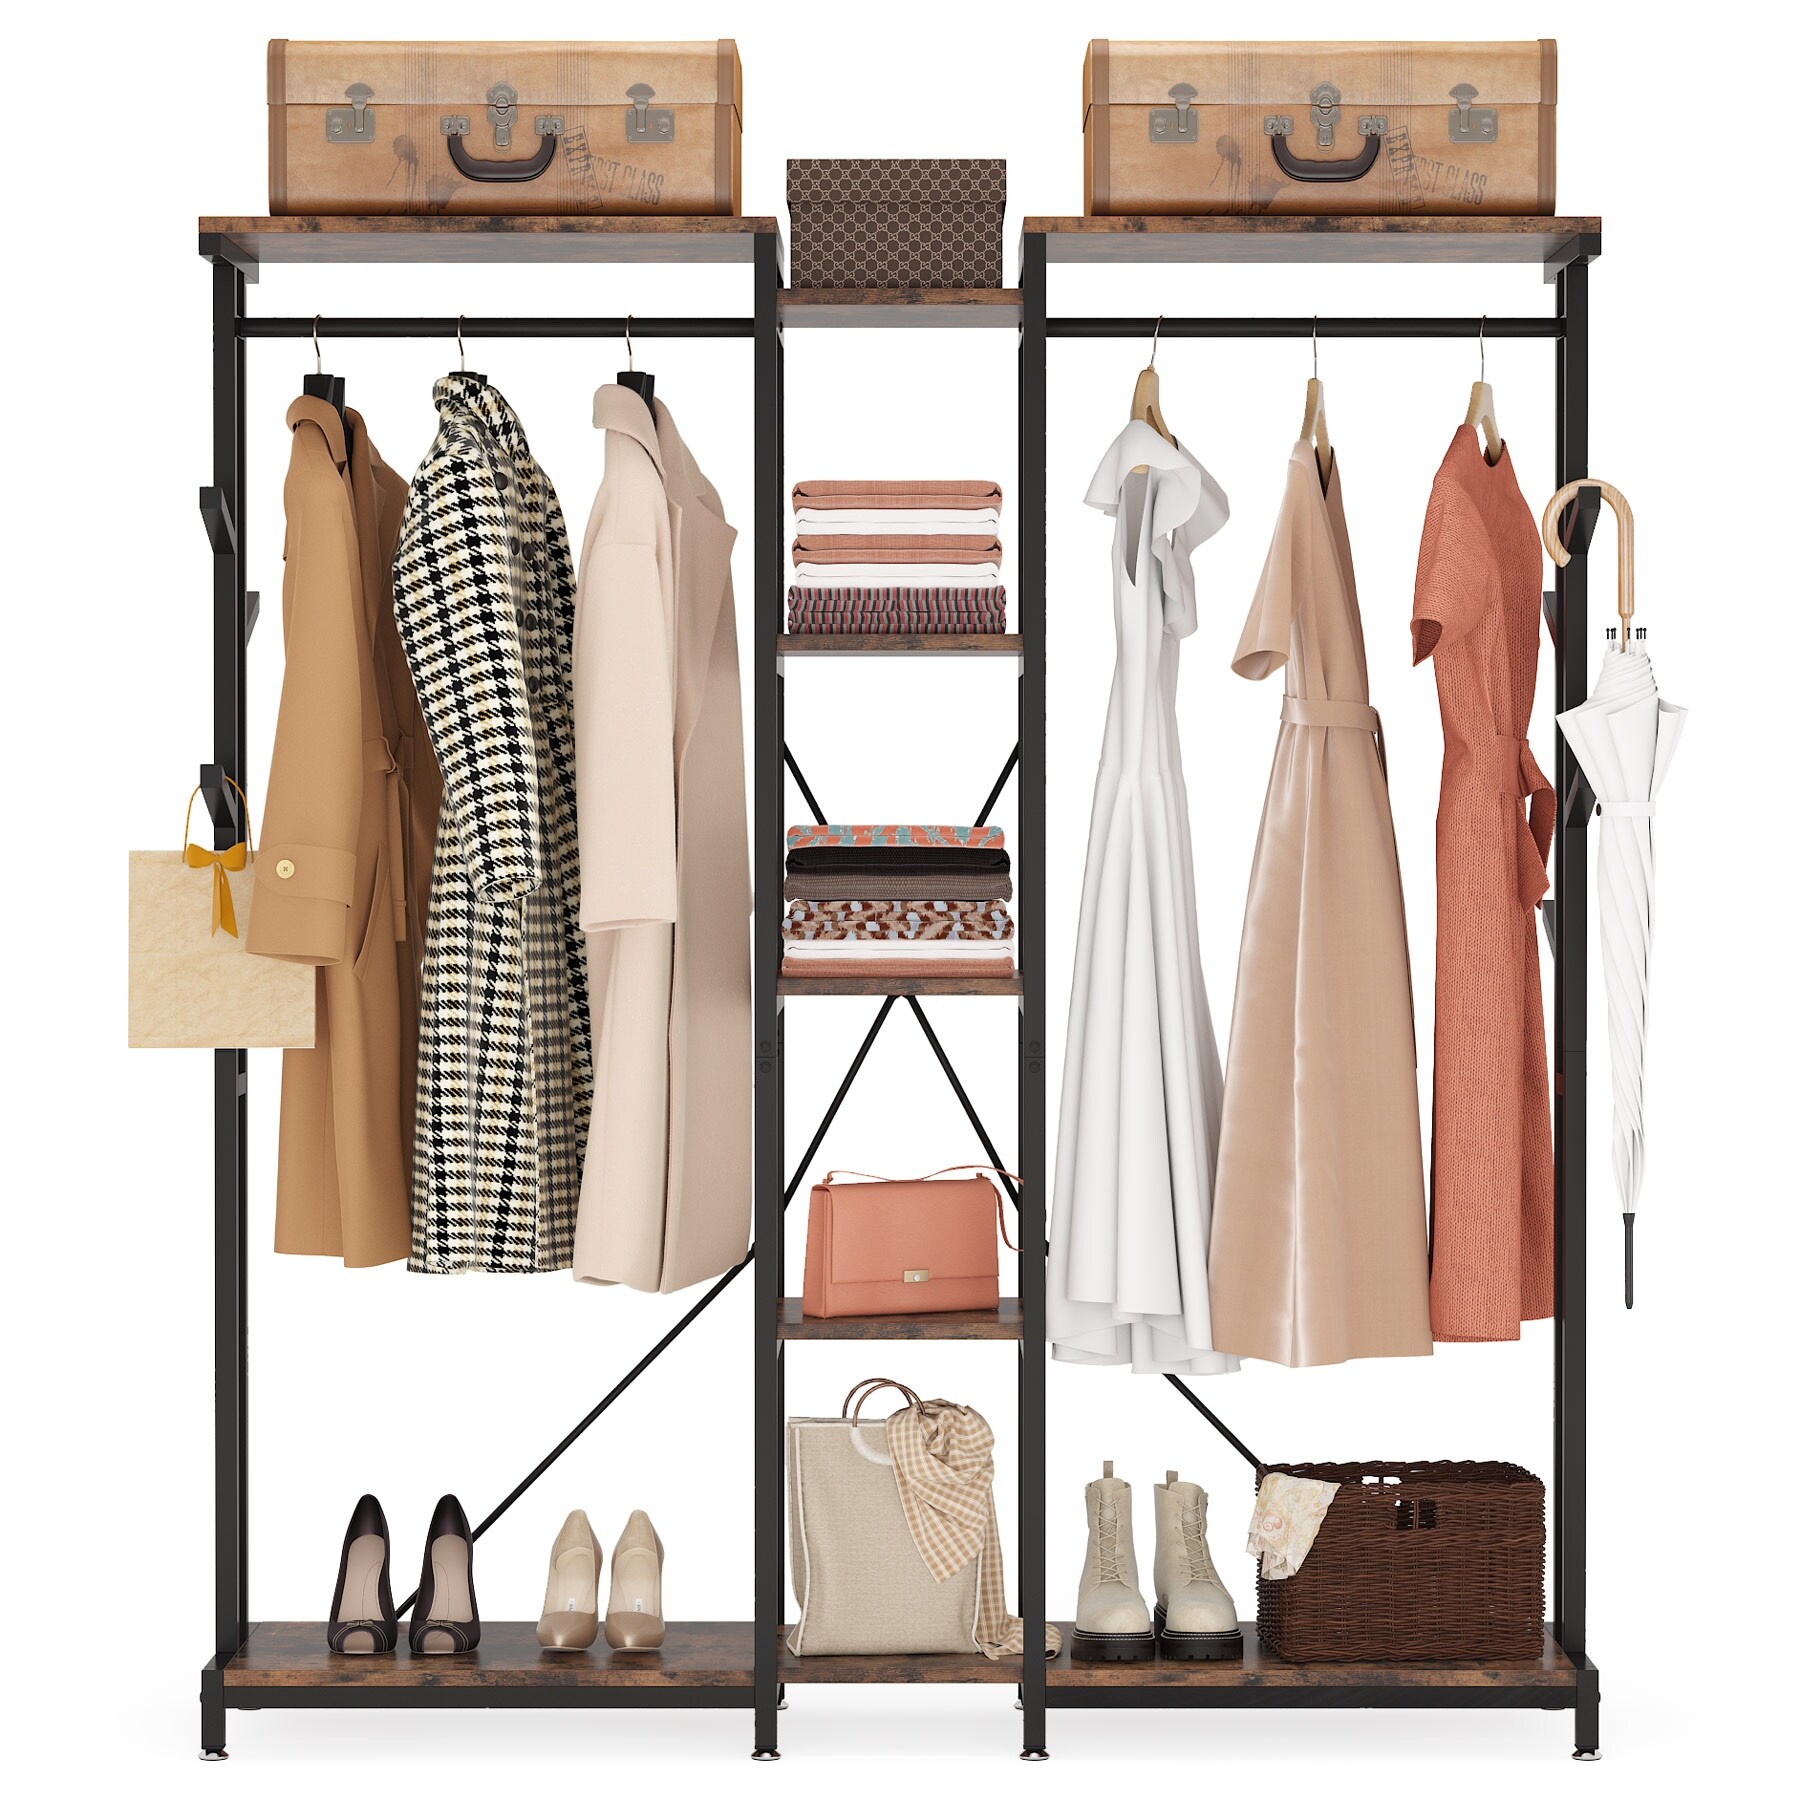 https://ak1.ostkcdn.com/images/products/is/images/direct/08176a853010766d50c792242b1639adad0cfb9c/Extra-Large-Closet-Organizer-with-Hooks-Clothes-Rack-with-Shelves-and-hanging-Rod.jpg